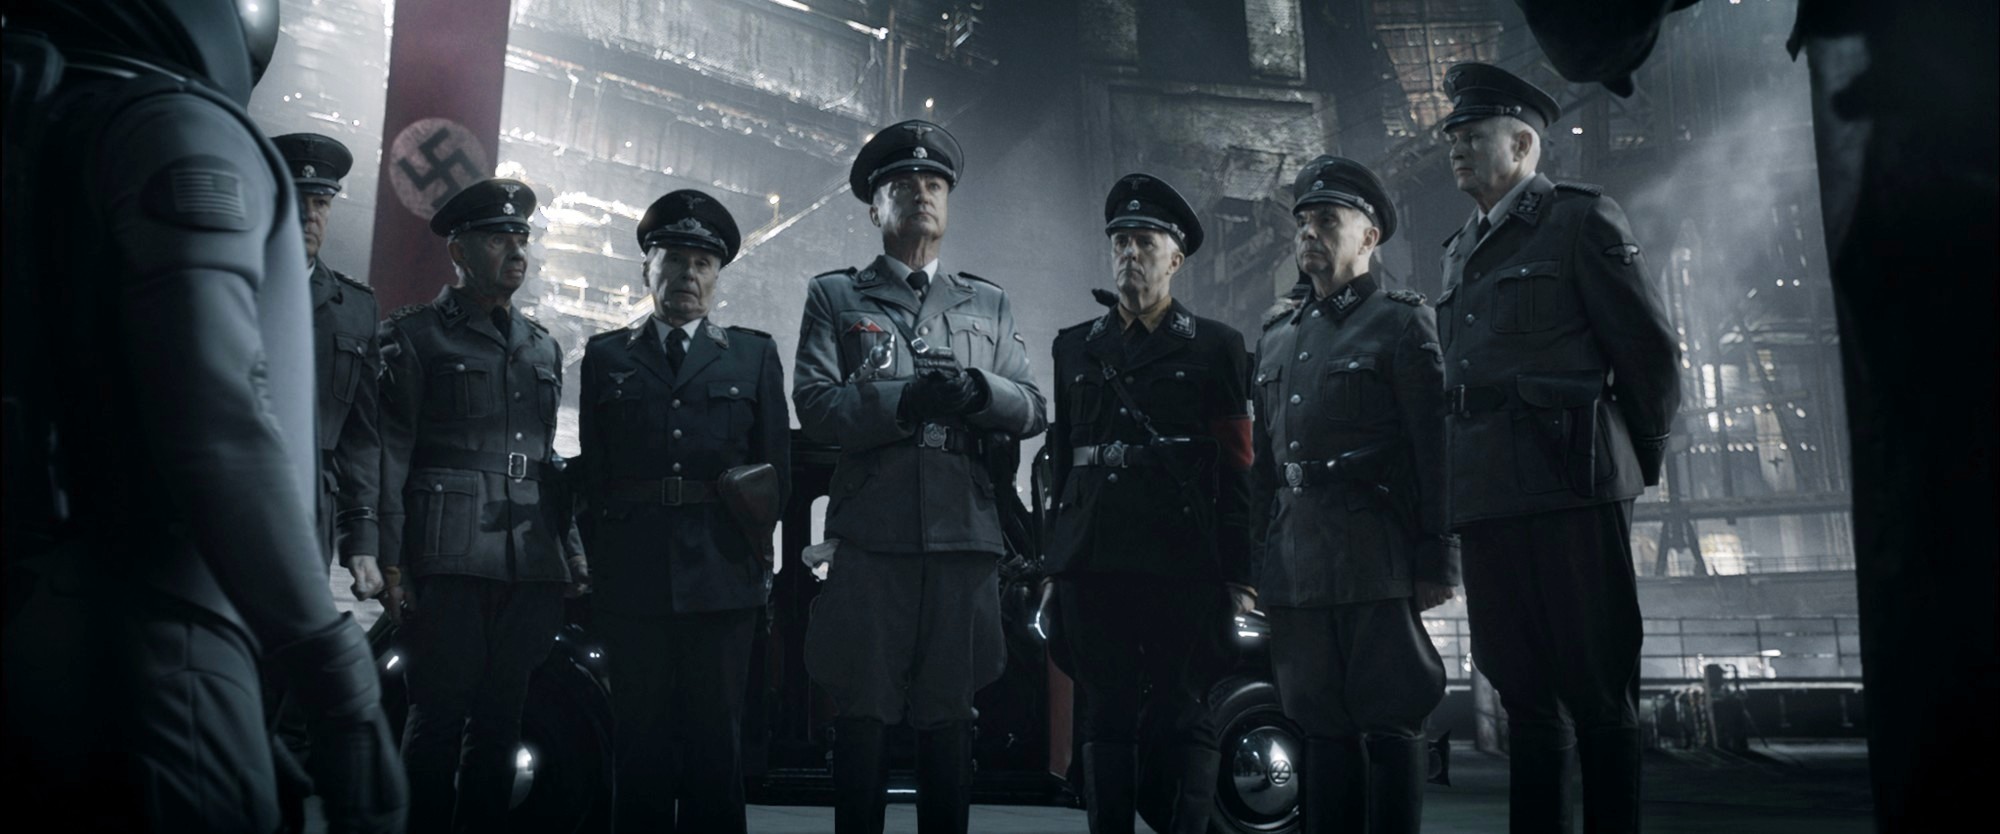 Udo Kier stars as Wolfgang Kortzfleisch in Entertainment One's Iron Sky (2012)